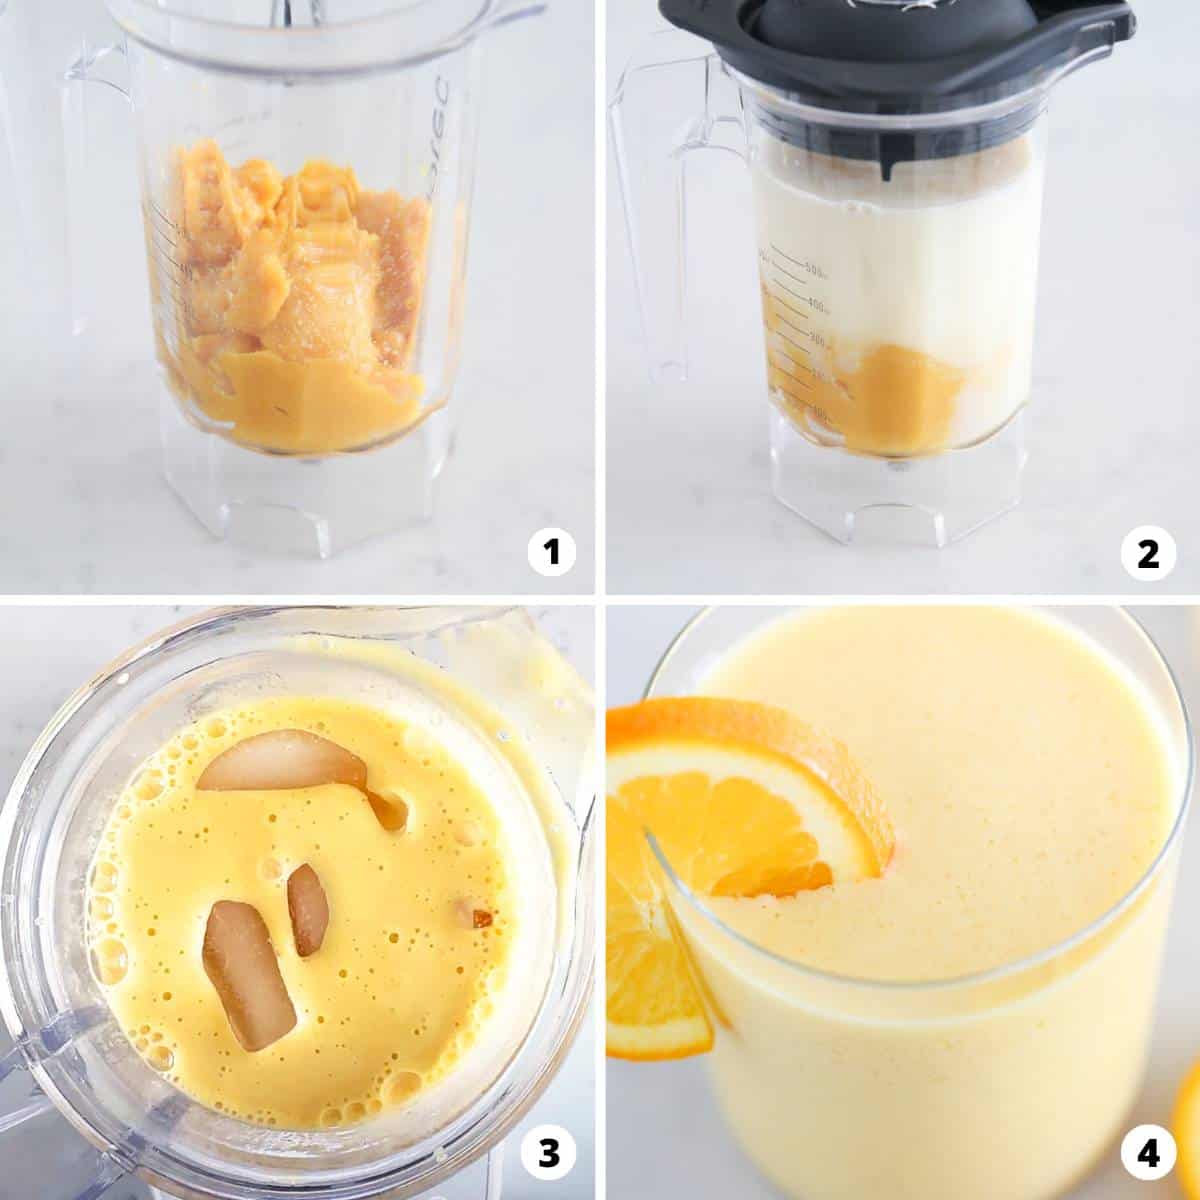 Showing how to make orange julius in a 4 step collage.